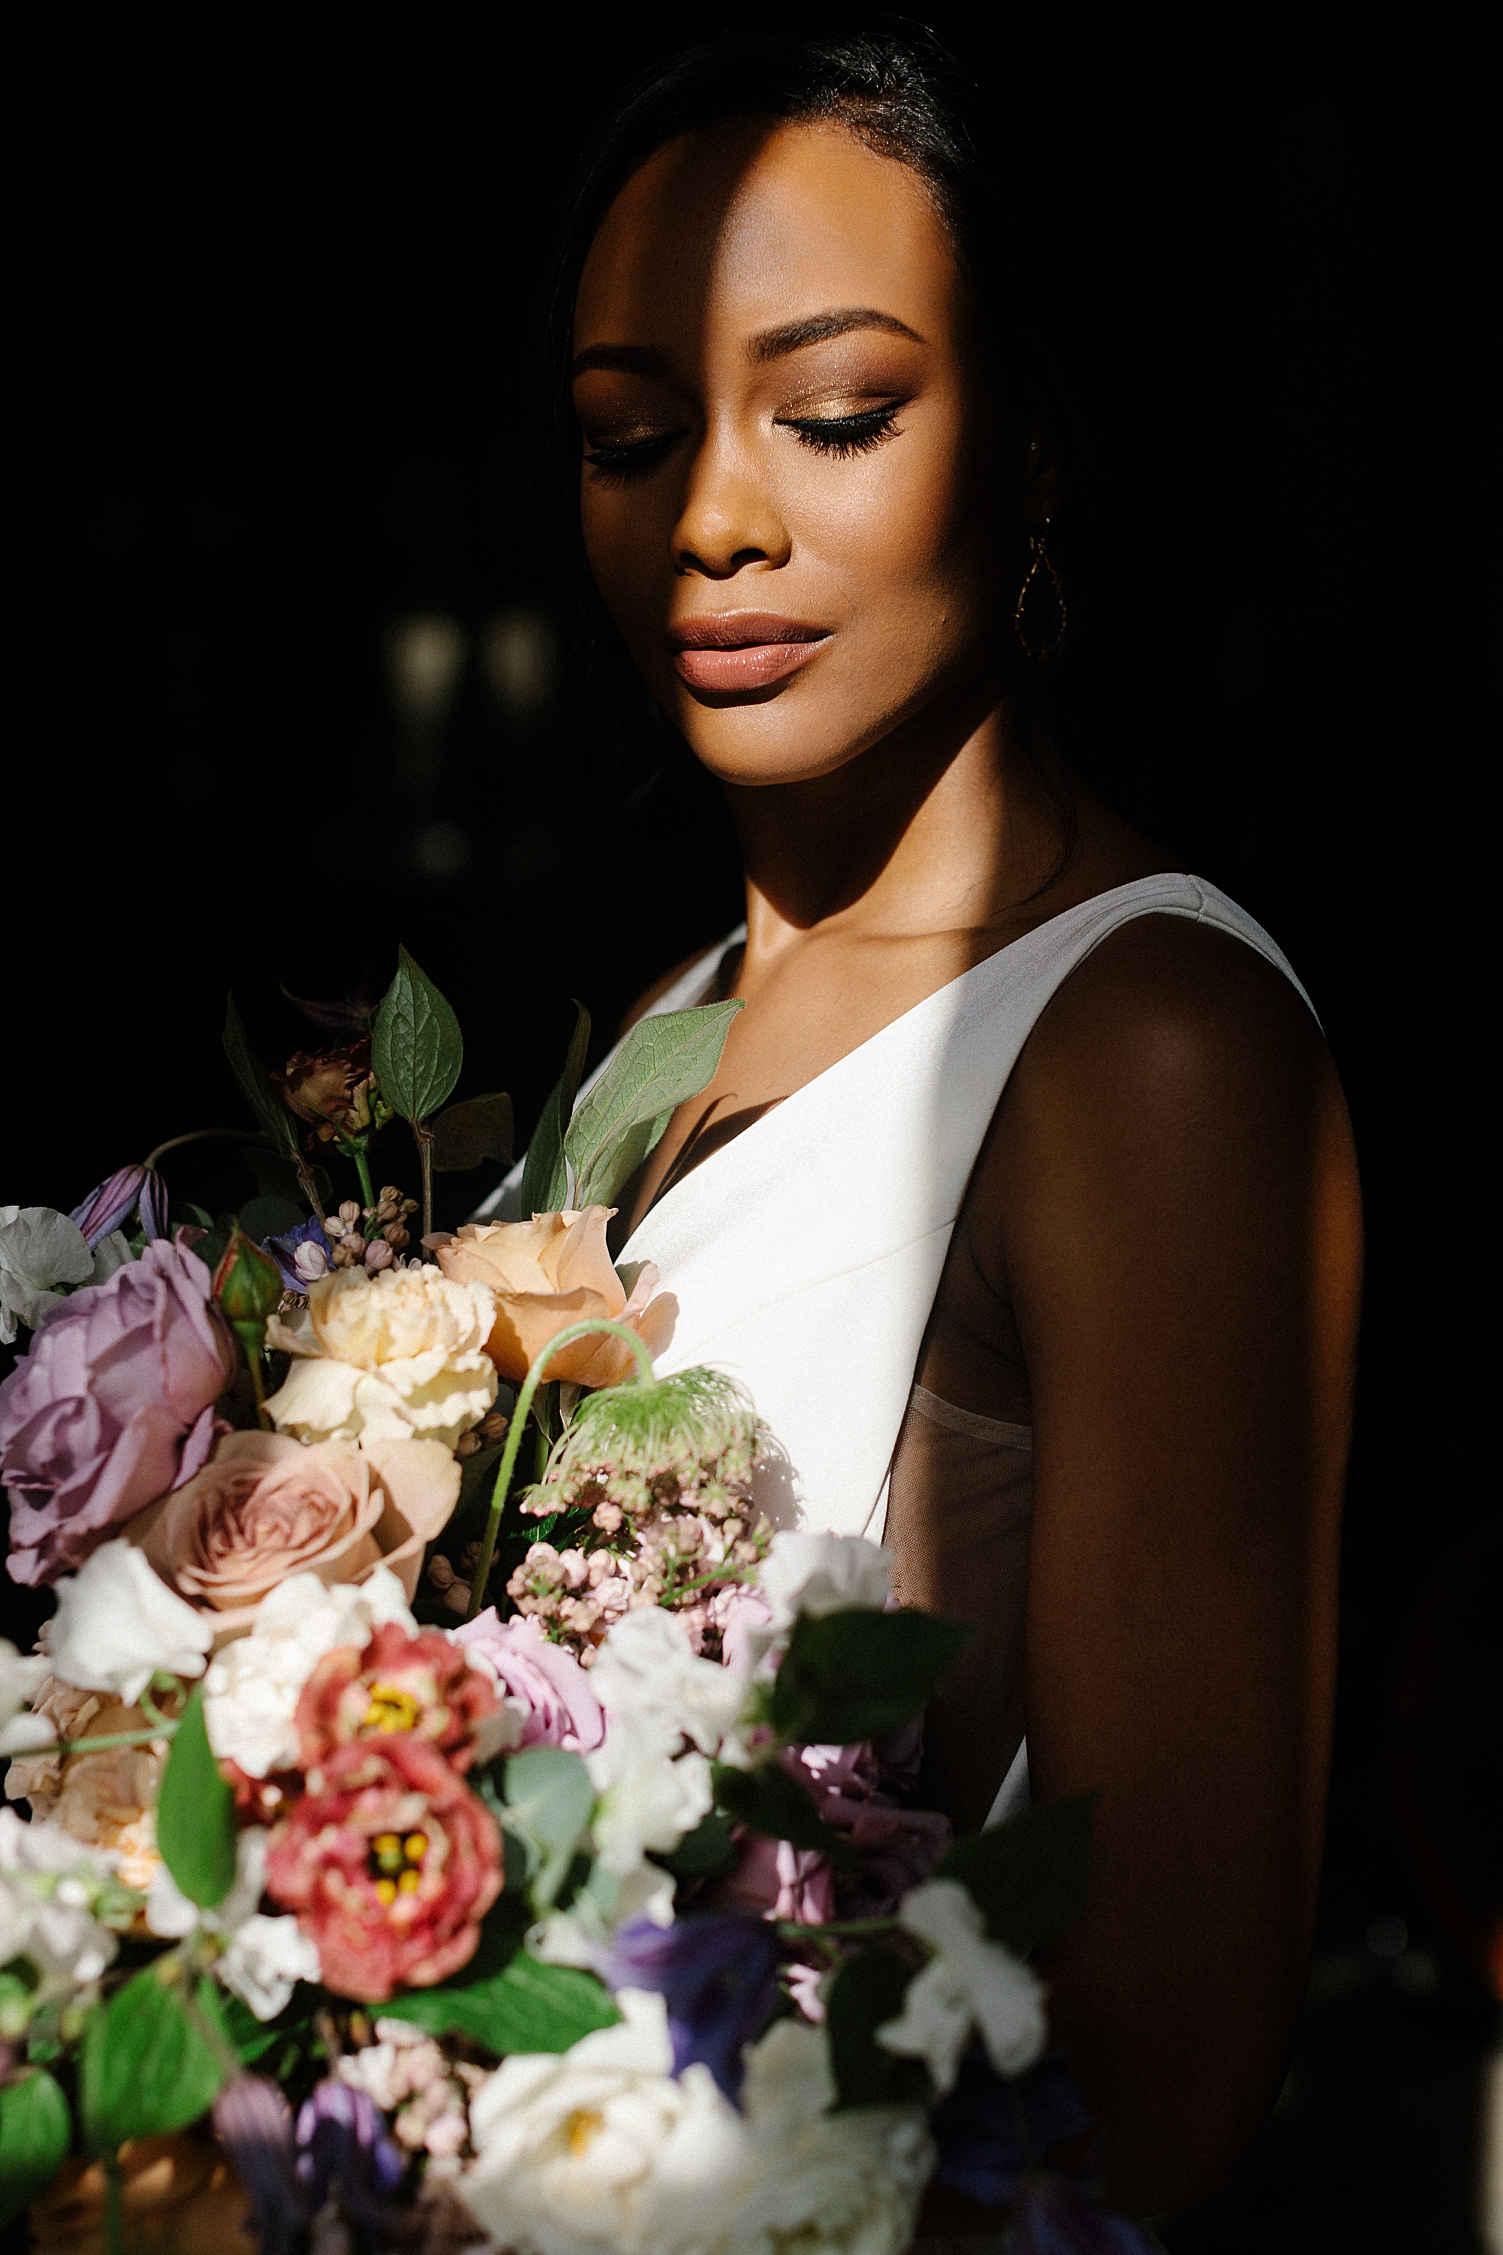  bride with bouquet in window light